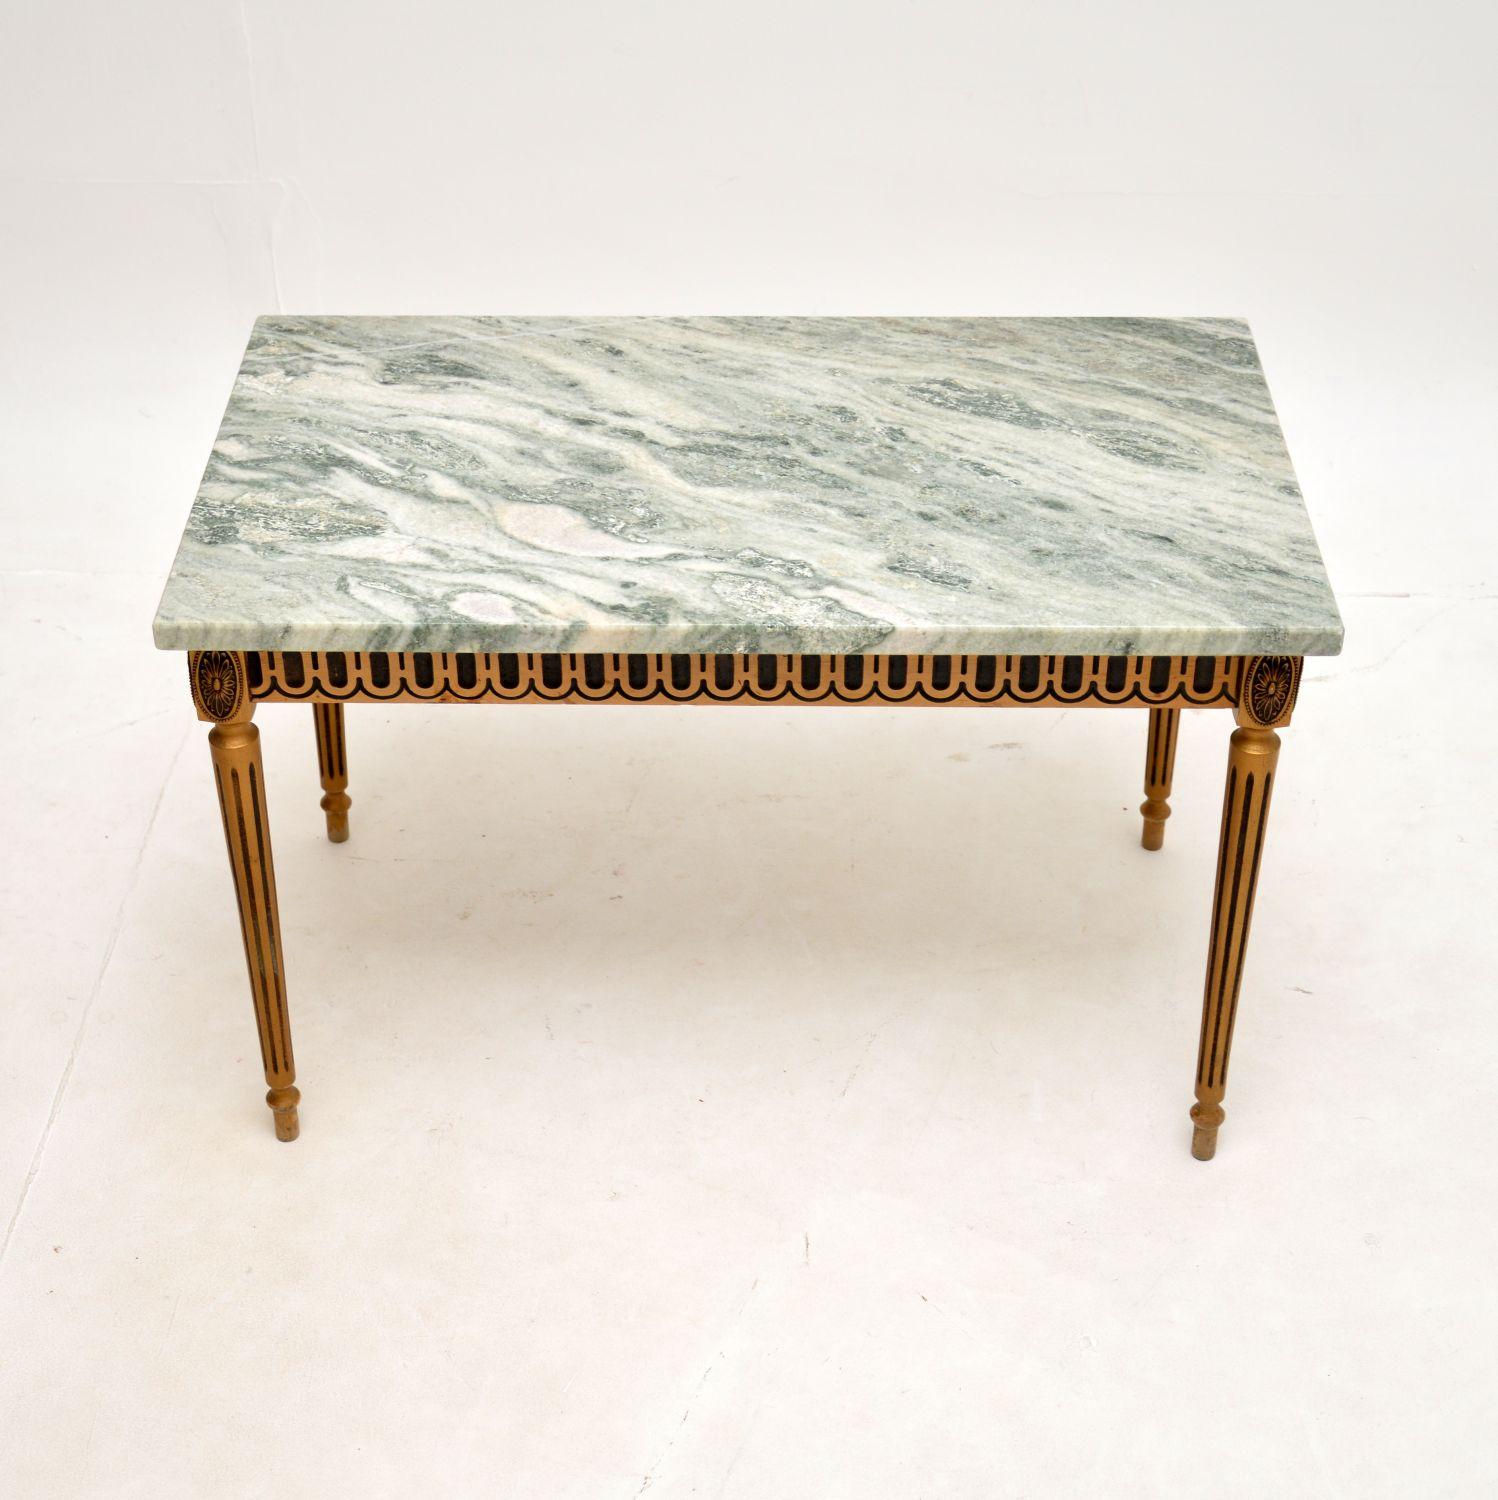 A beautiful little antique French gilt wood marble top coffee table. This was made in France, it dates from around the 1950’s.

It is very well made, with a solid gilt wood frame and gorgeous marble top that lifts off and onto the base. The marble